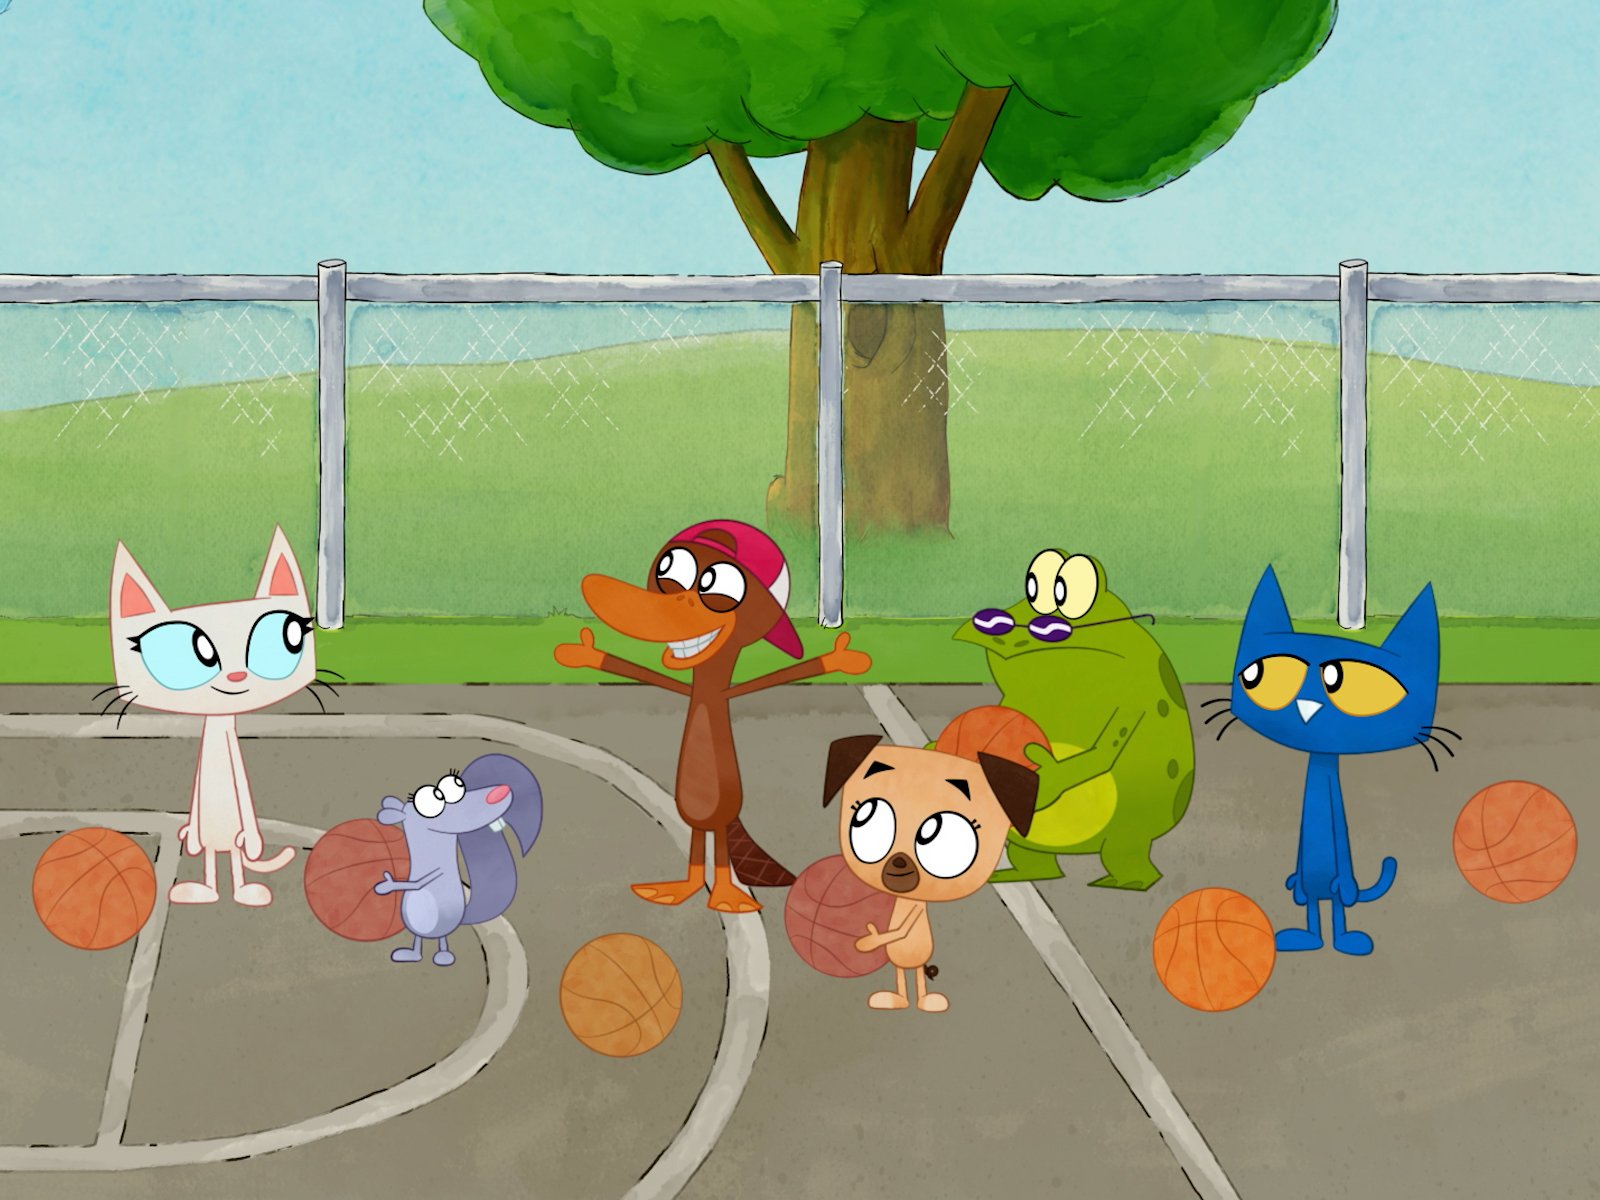 Six animal characters are playing basketball together on a fenced-in basketball court. 